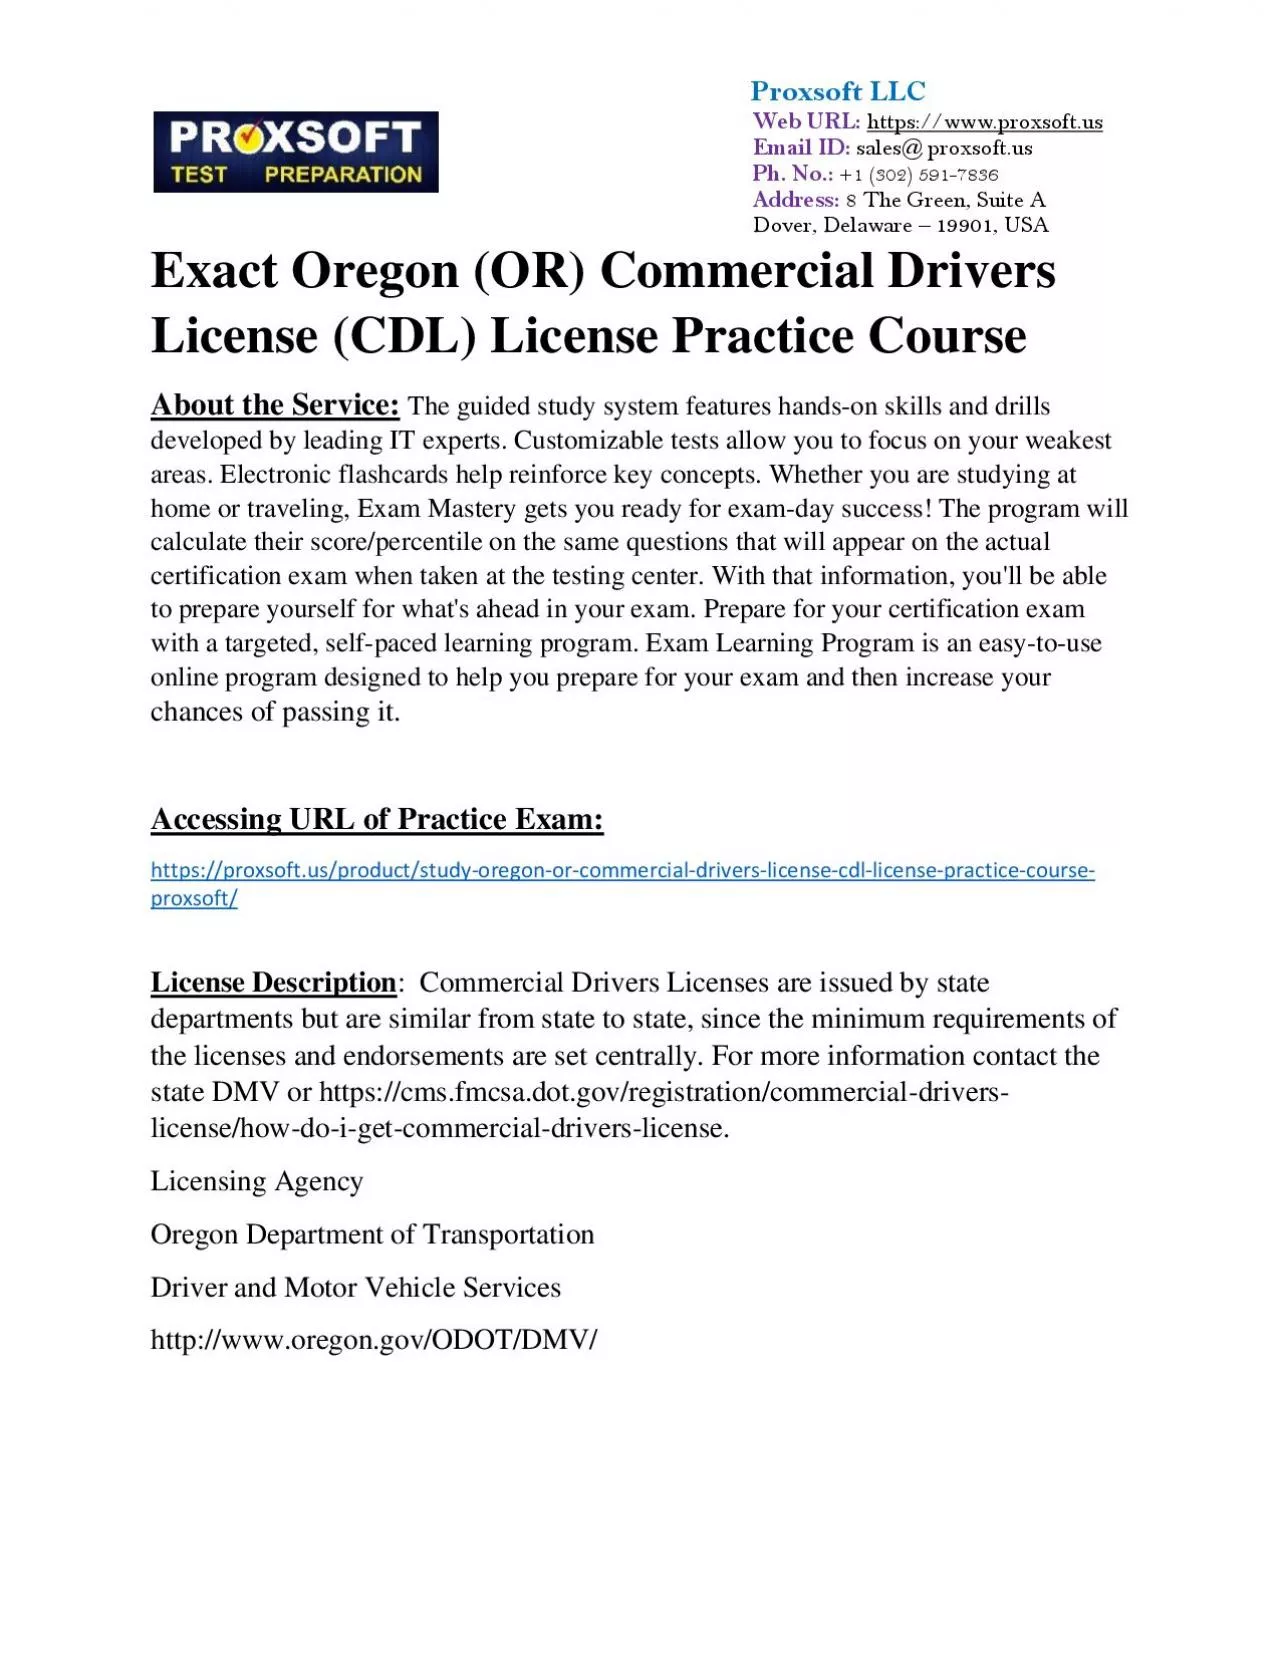 Exact Oregon (OR) Commercial Drivers License (CDL) License Practice Course